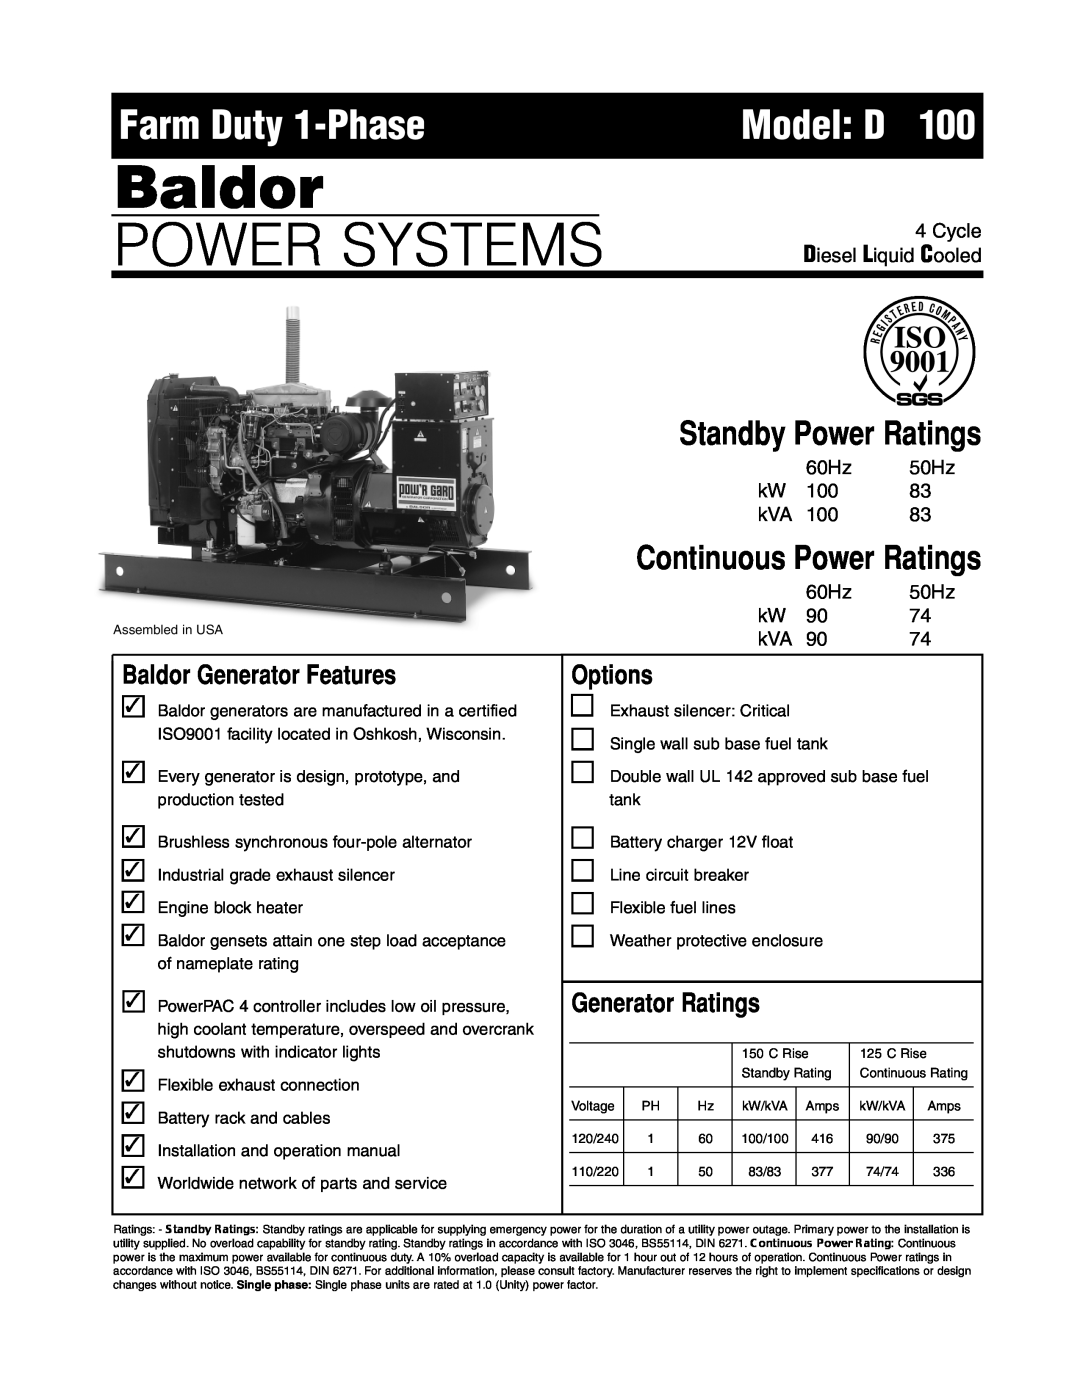 Baldor ISO9001 manual Model D100, Baldor, Power Systems, Farm Duty 1-Phase, Standby Power Ratings, Continuous Power Ratings 